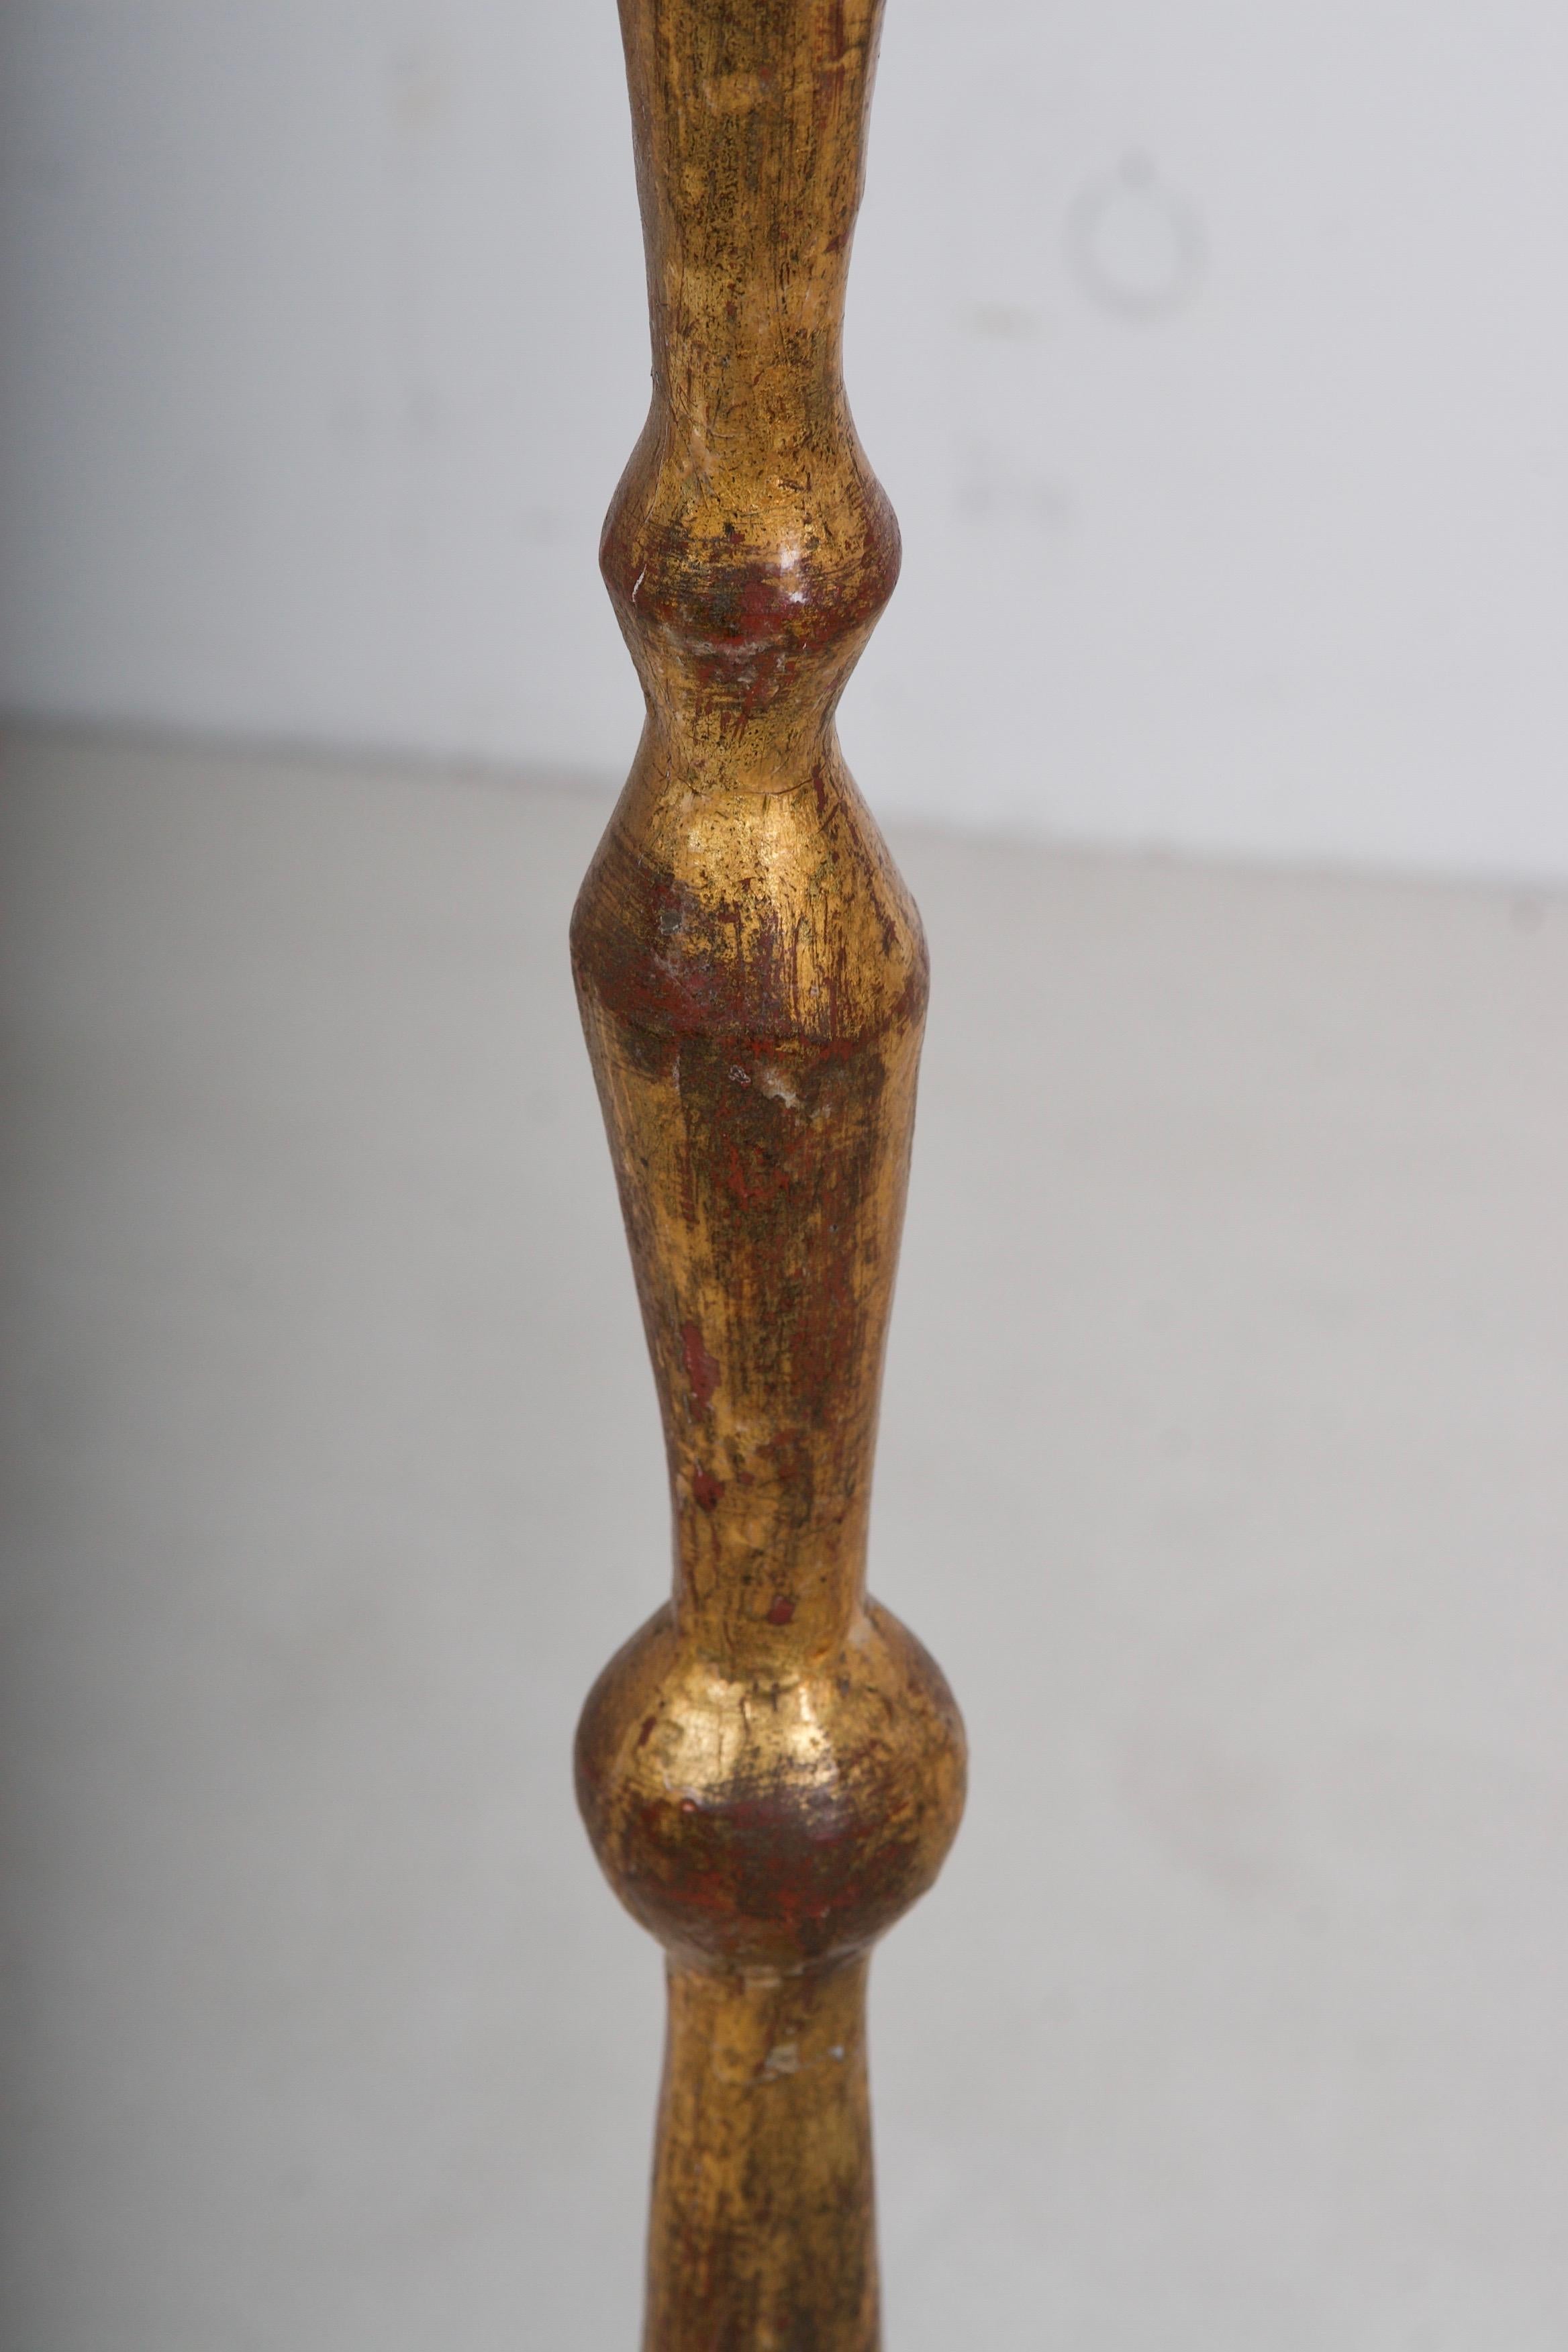 20th Century Gilded Bronze, Pomme de Pin Torchere, after the model by Giacometti, Hanschen &G